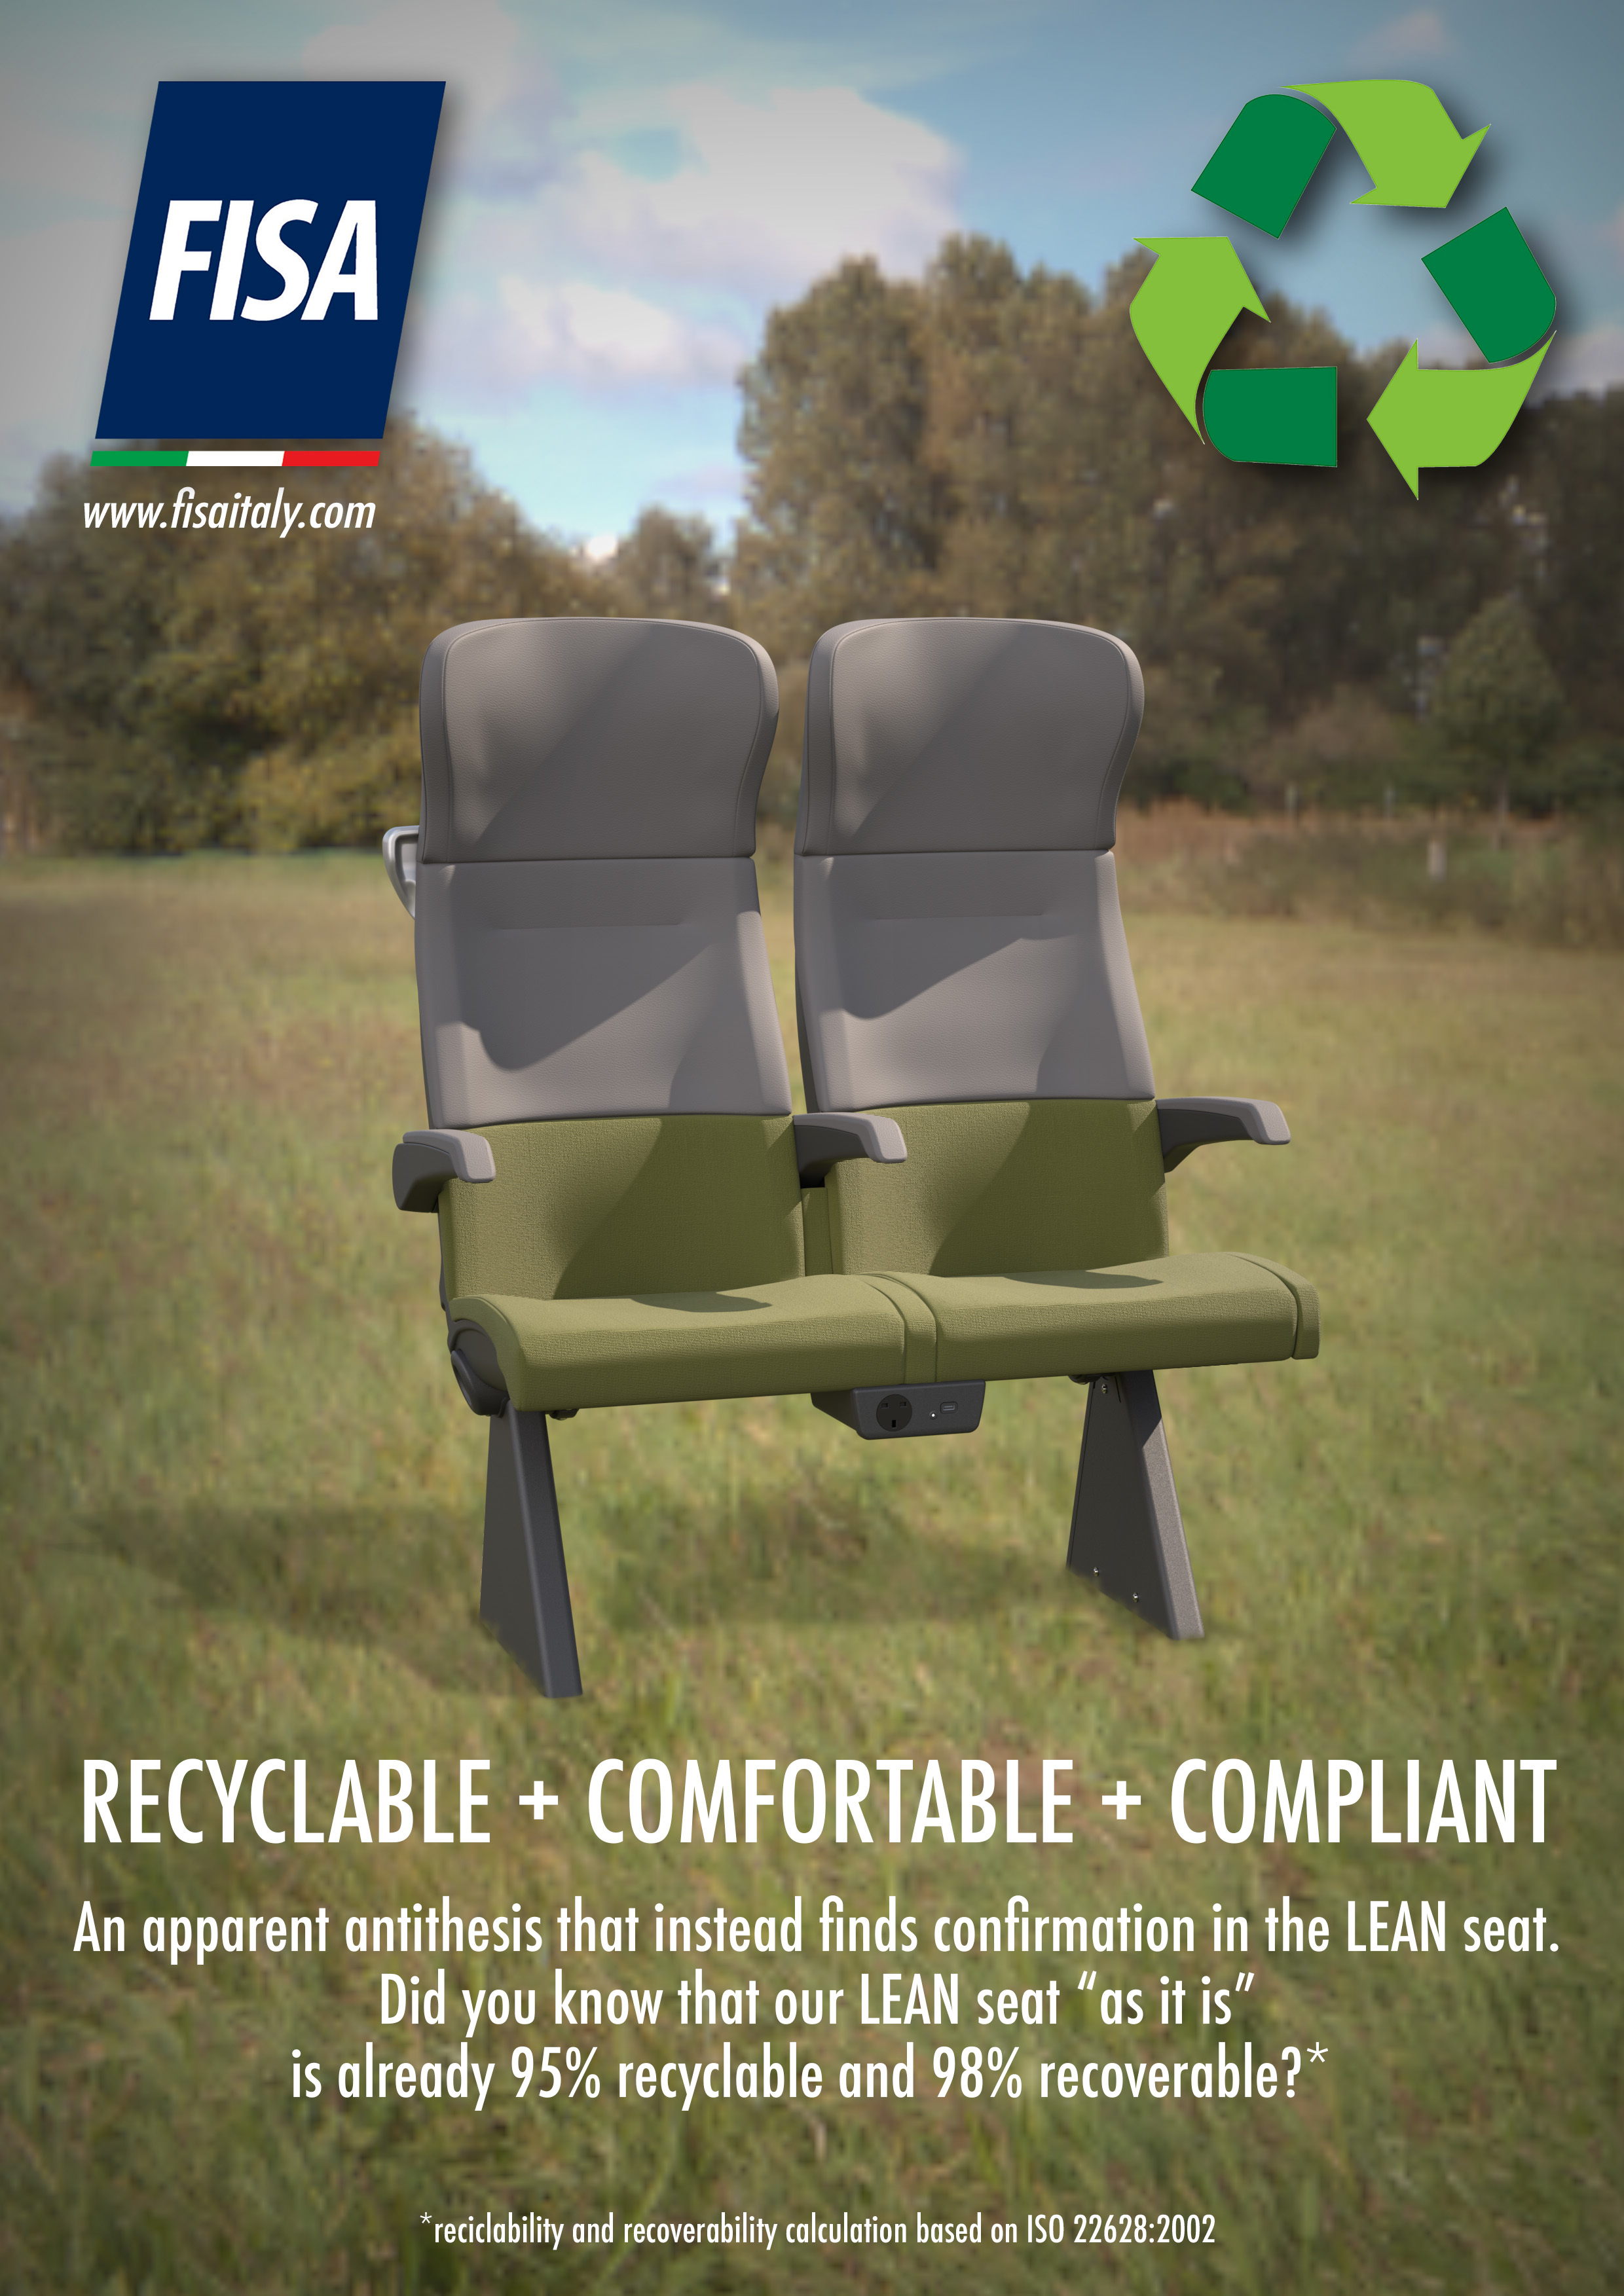 RECYCLABLE + COMFORTABLE + COMPLIANT = LEAN Seat